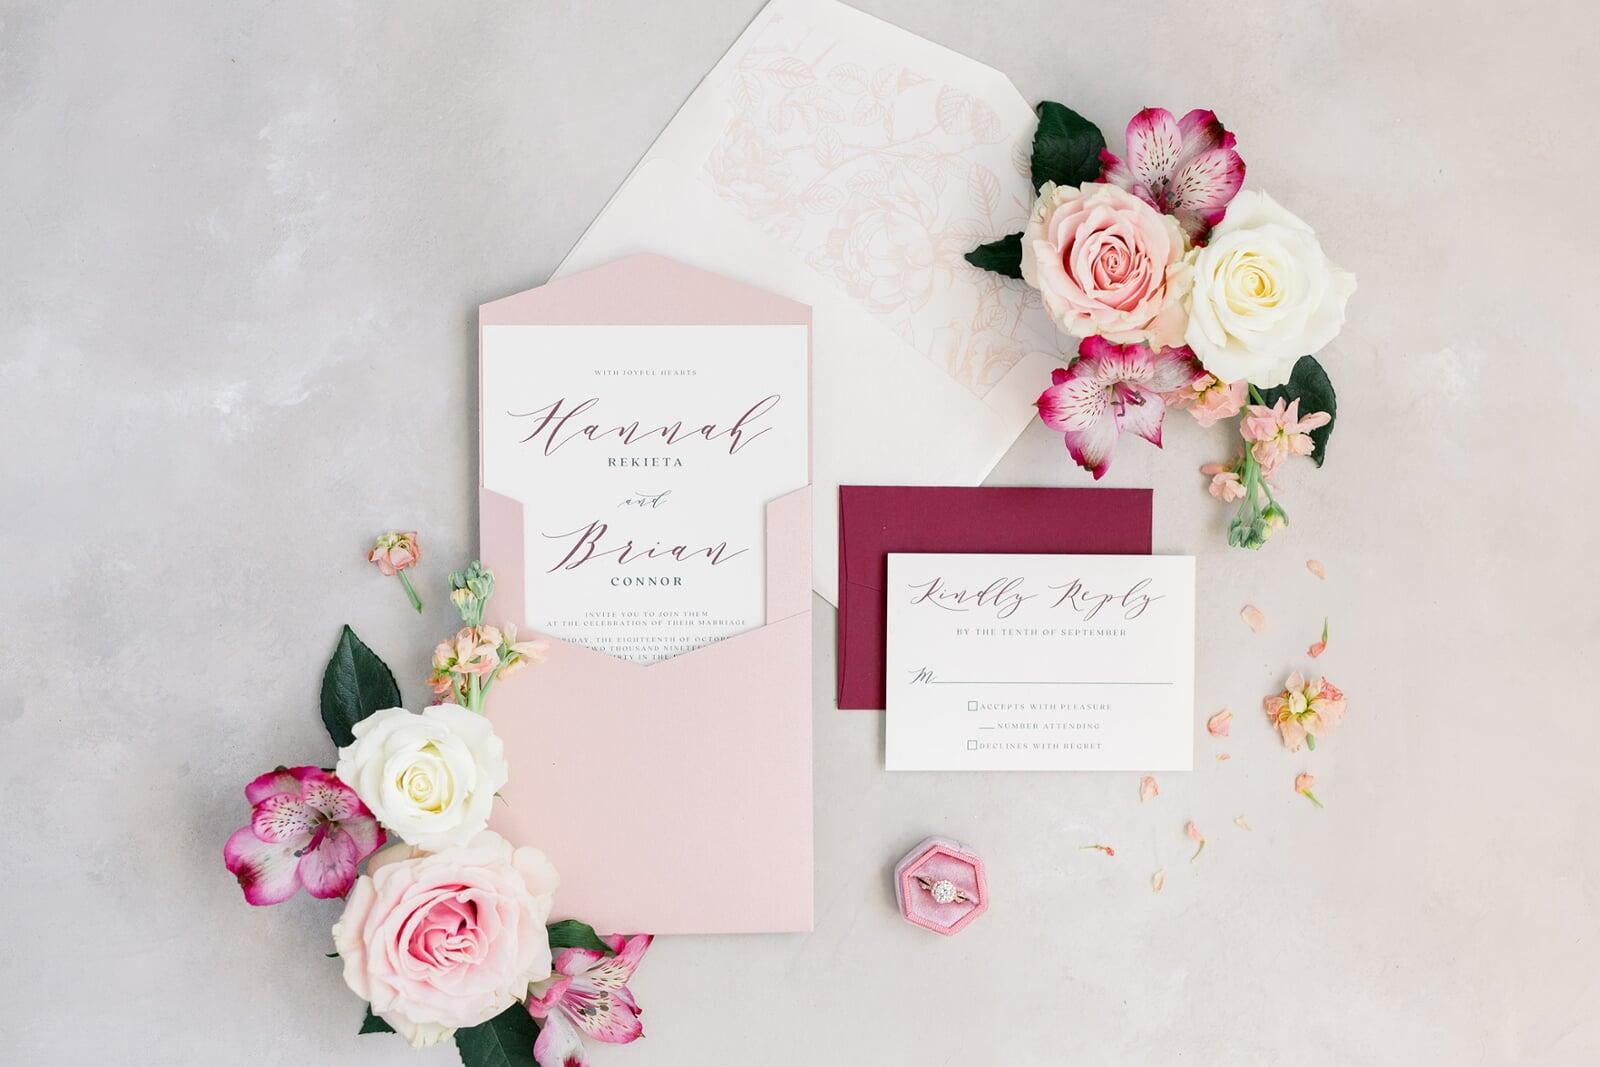 When Should I Mail My Invitations?